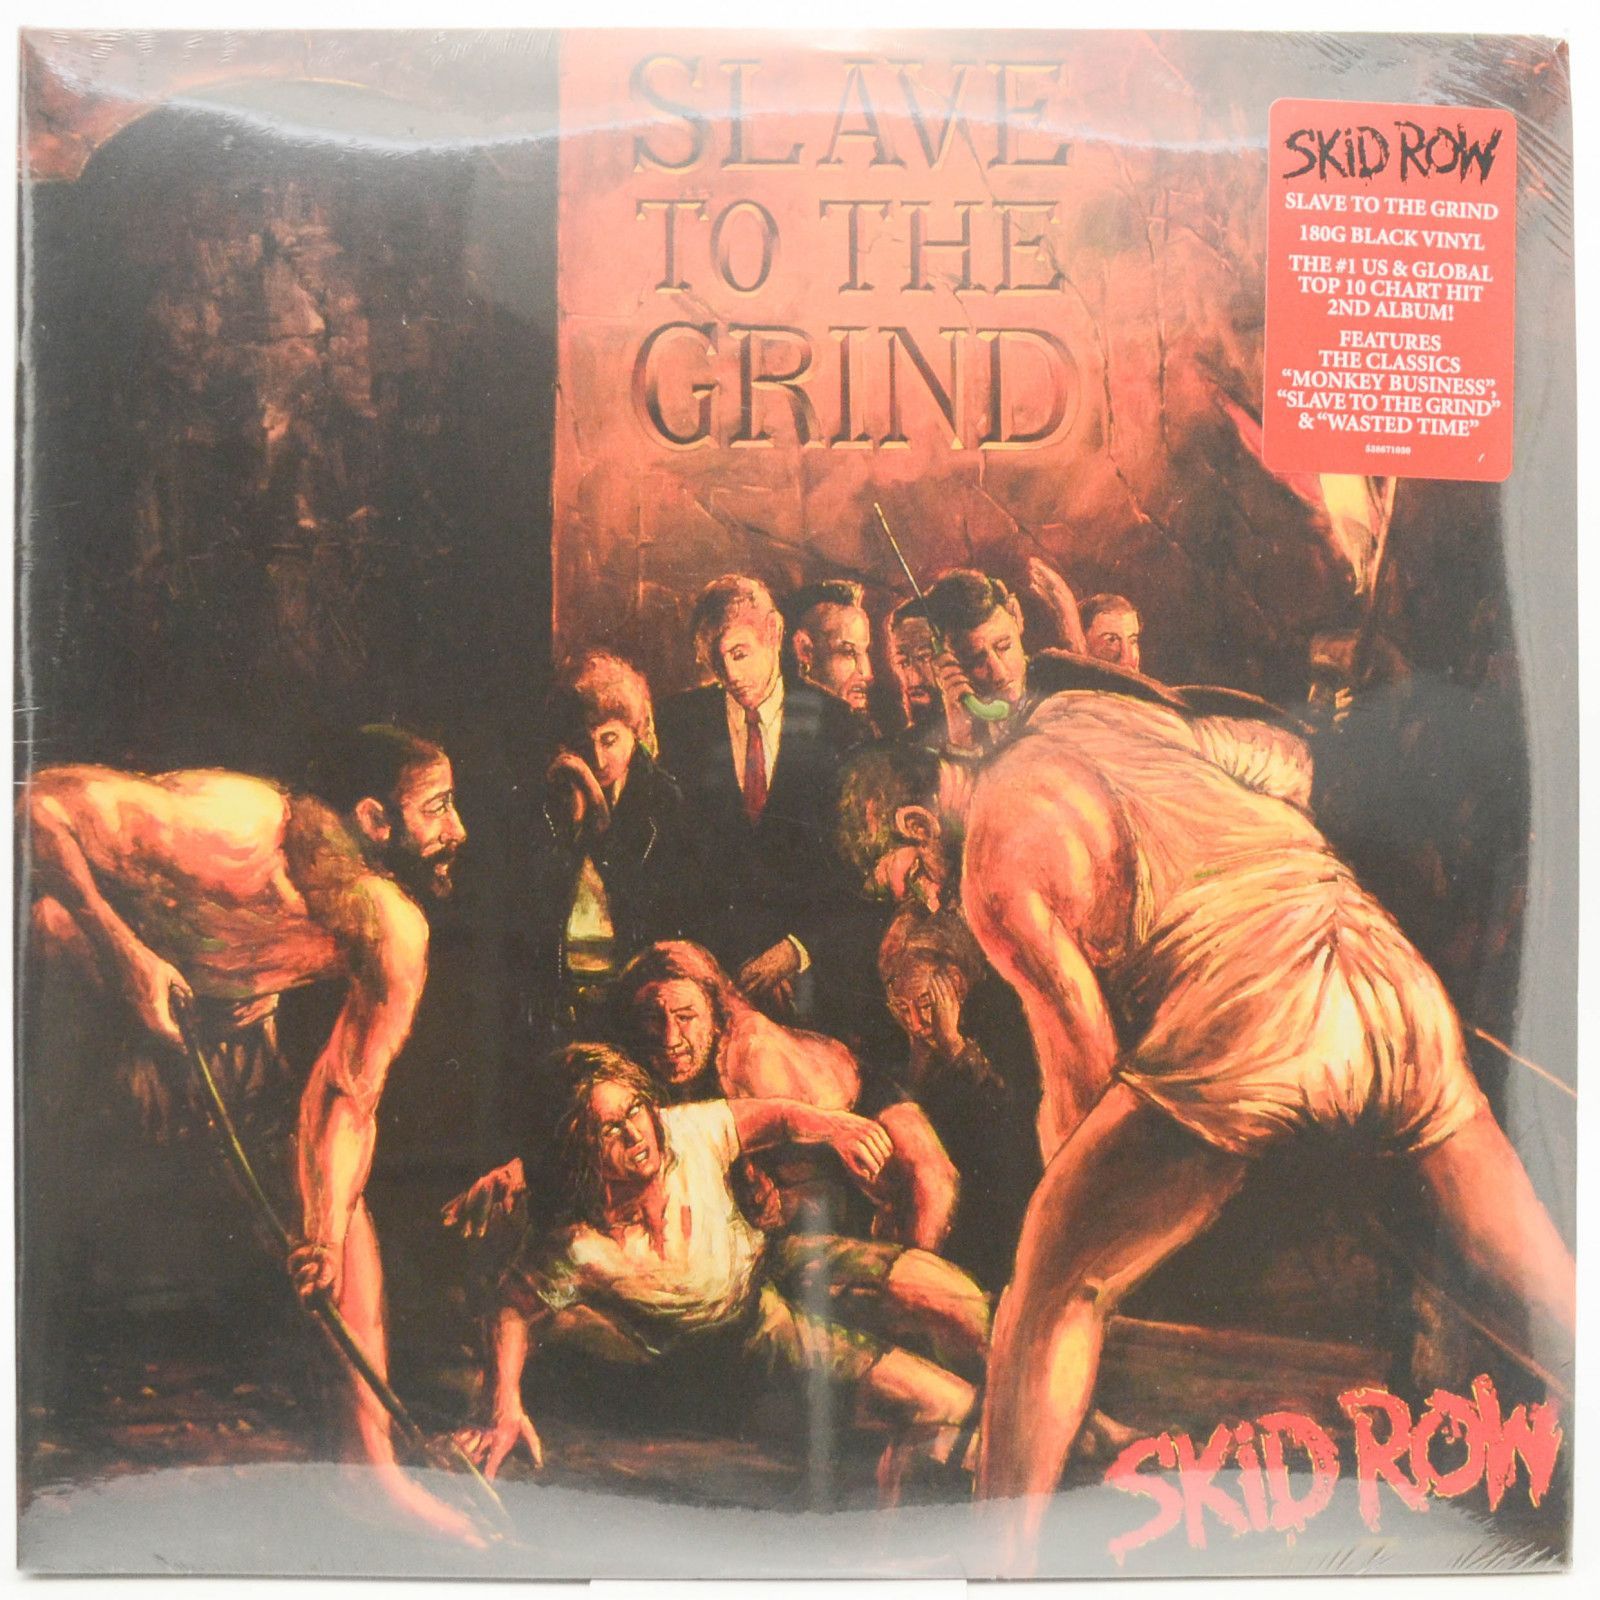 Skid Row — Slave To The Grind (2LP), 1991